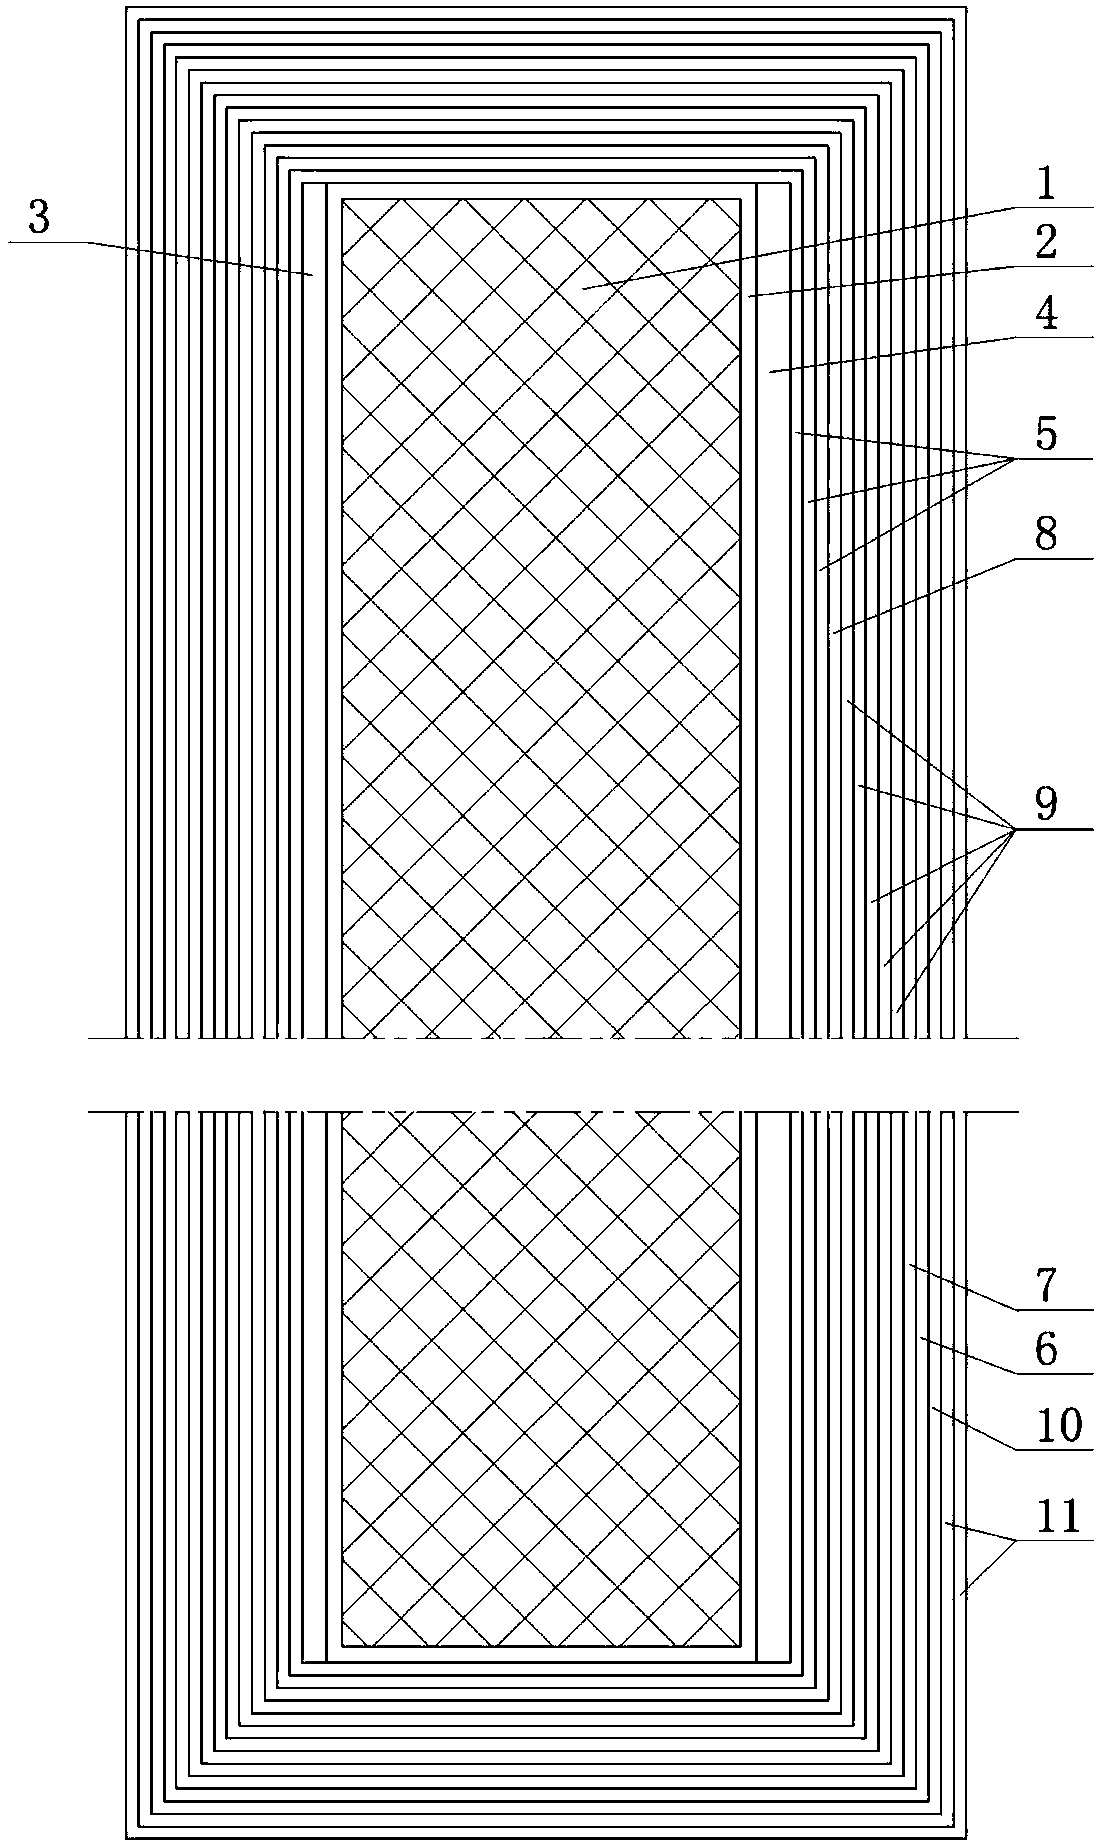 Decorative composite plate with surface being coated with fluorocarbon paint